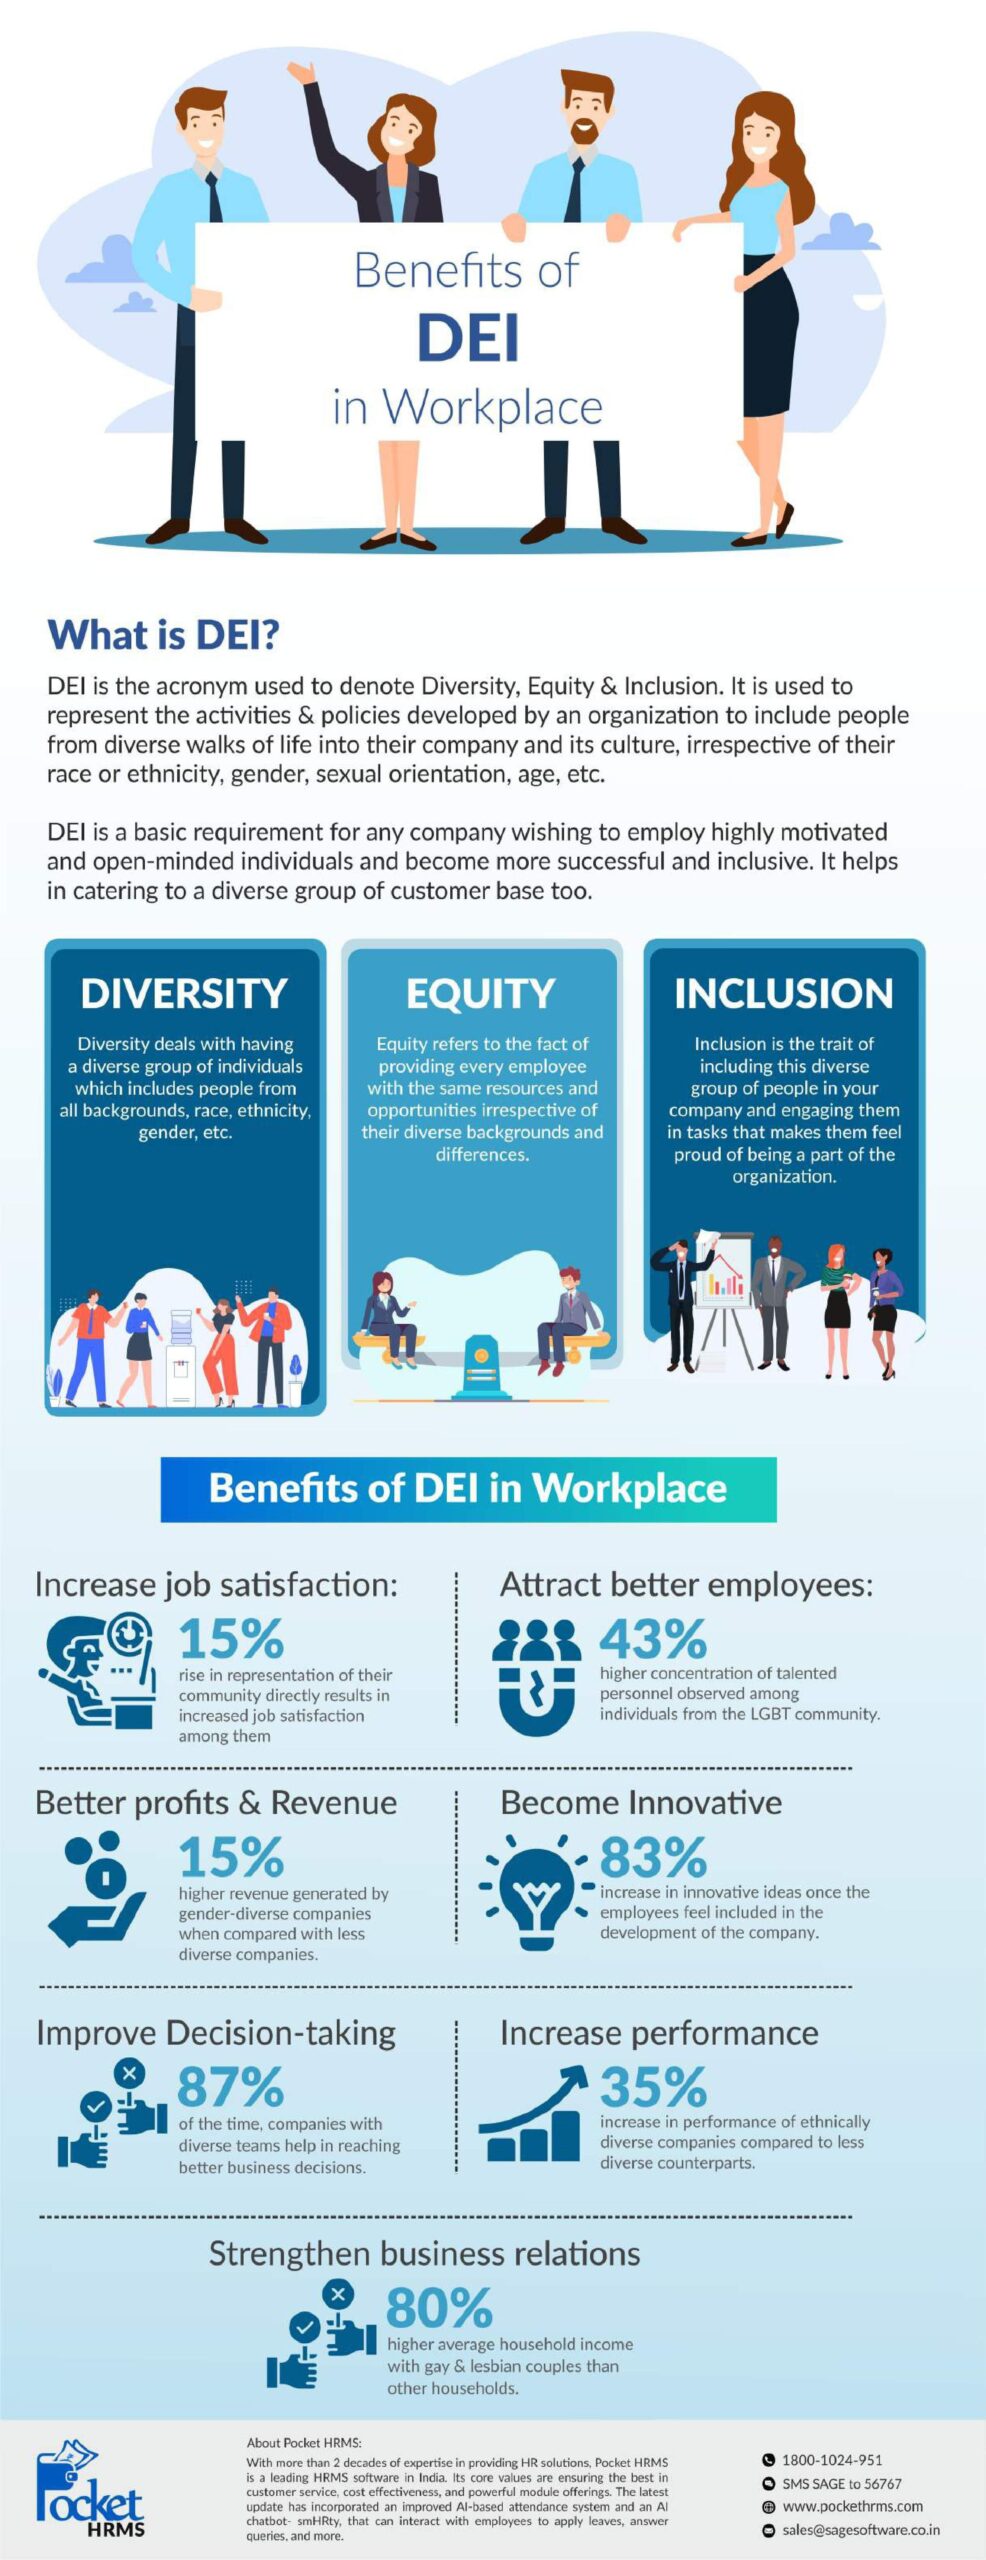 Benefits of DEI in Workplace